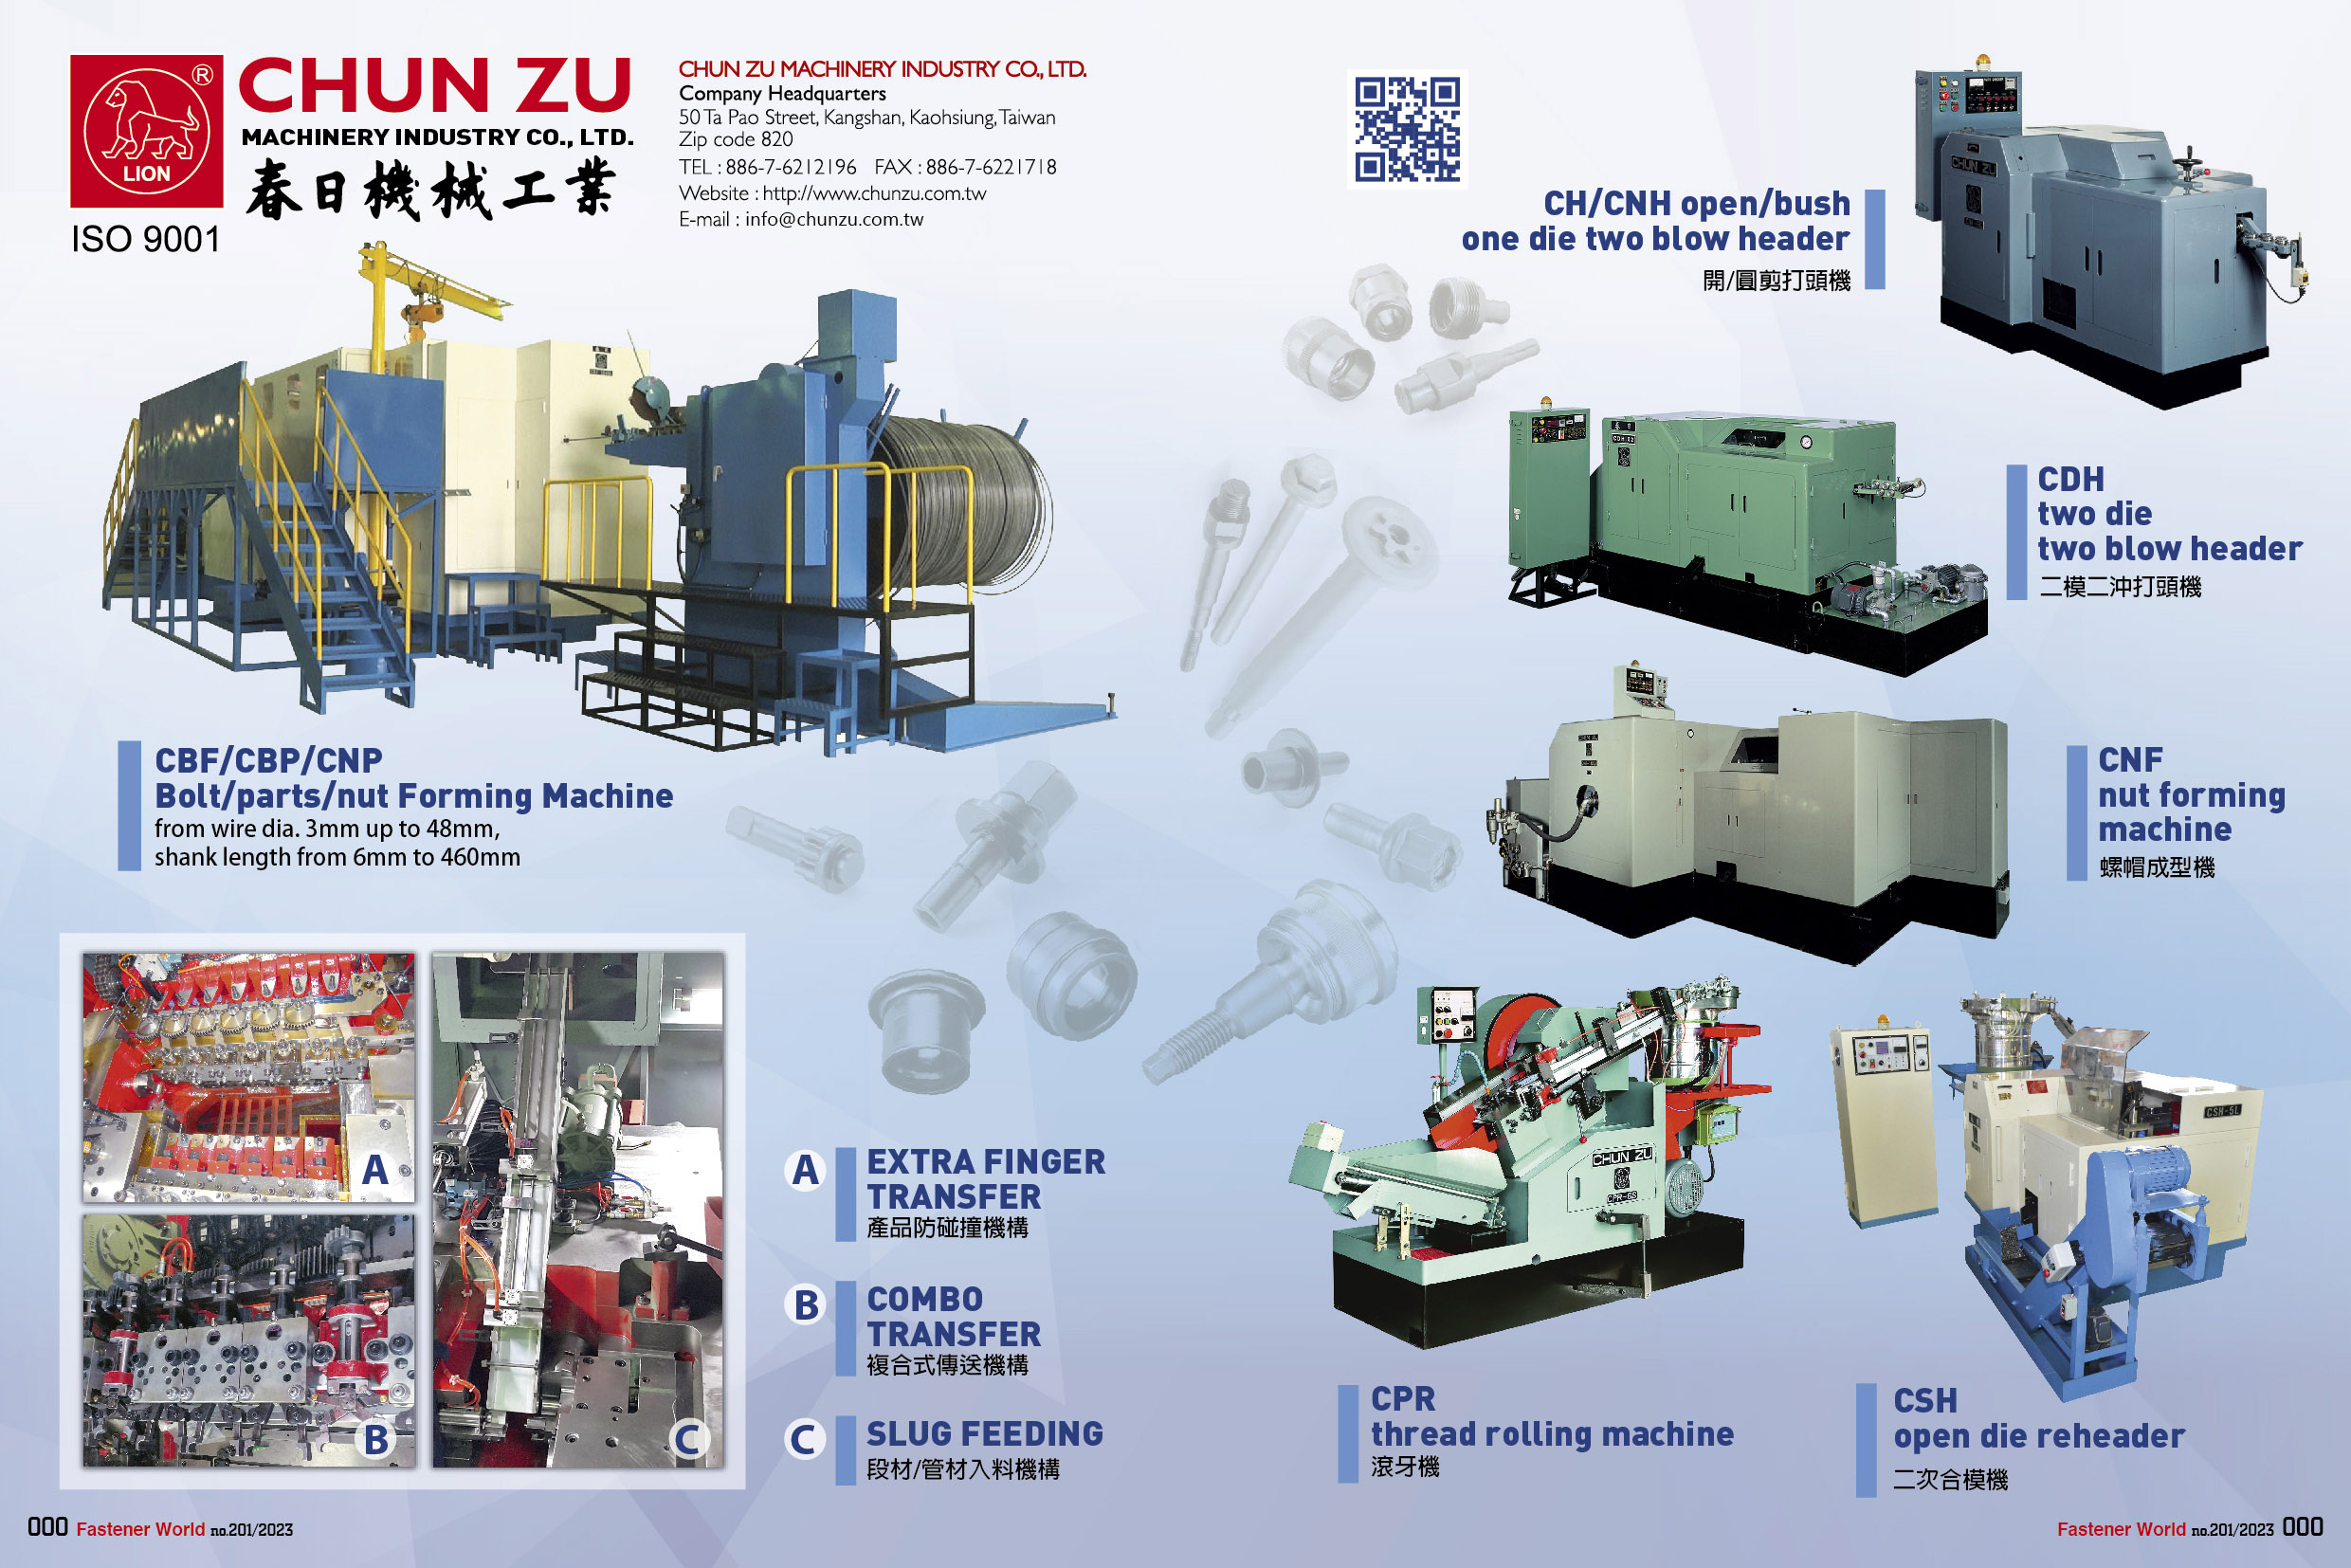 CHUN ZU MACHINERY INDUSTRY CO., LTD.  , CBF/CBP/CNP Bolt / Parts / Nut Forming Machine, CH/CNH open/bush One Die Two Blow Header, CDH Two Die Two Blow Header, CNF Nut Forming Machine, CPR Thread Rolling Machine, CSH Open Die Reheader , Nut Formers